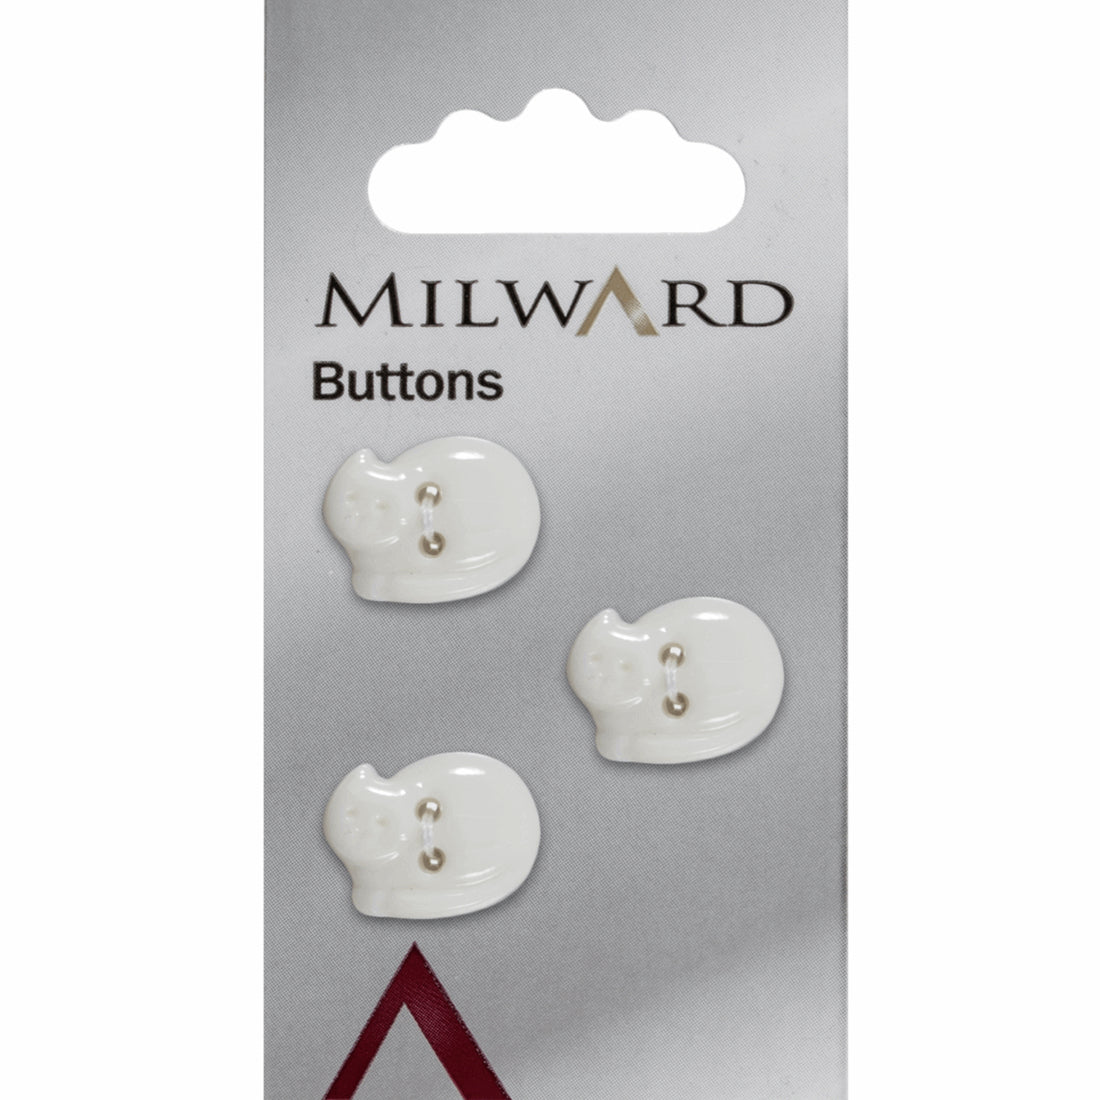 Milward Carded Buttons White Cat, size 17mm - valleywools